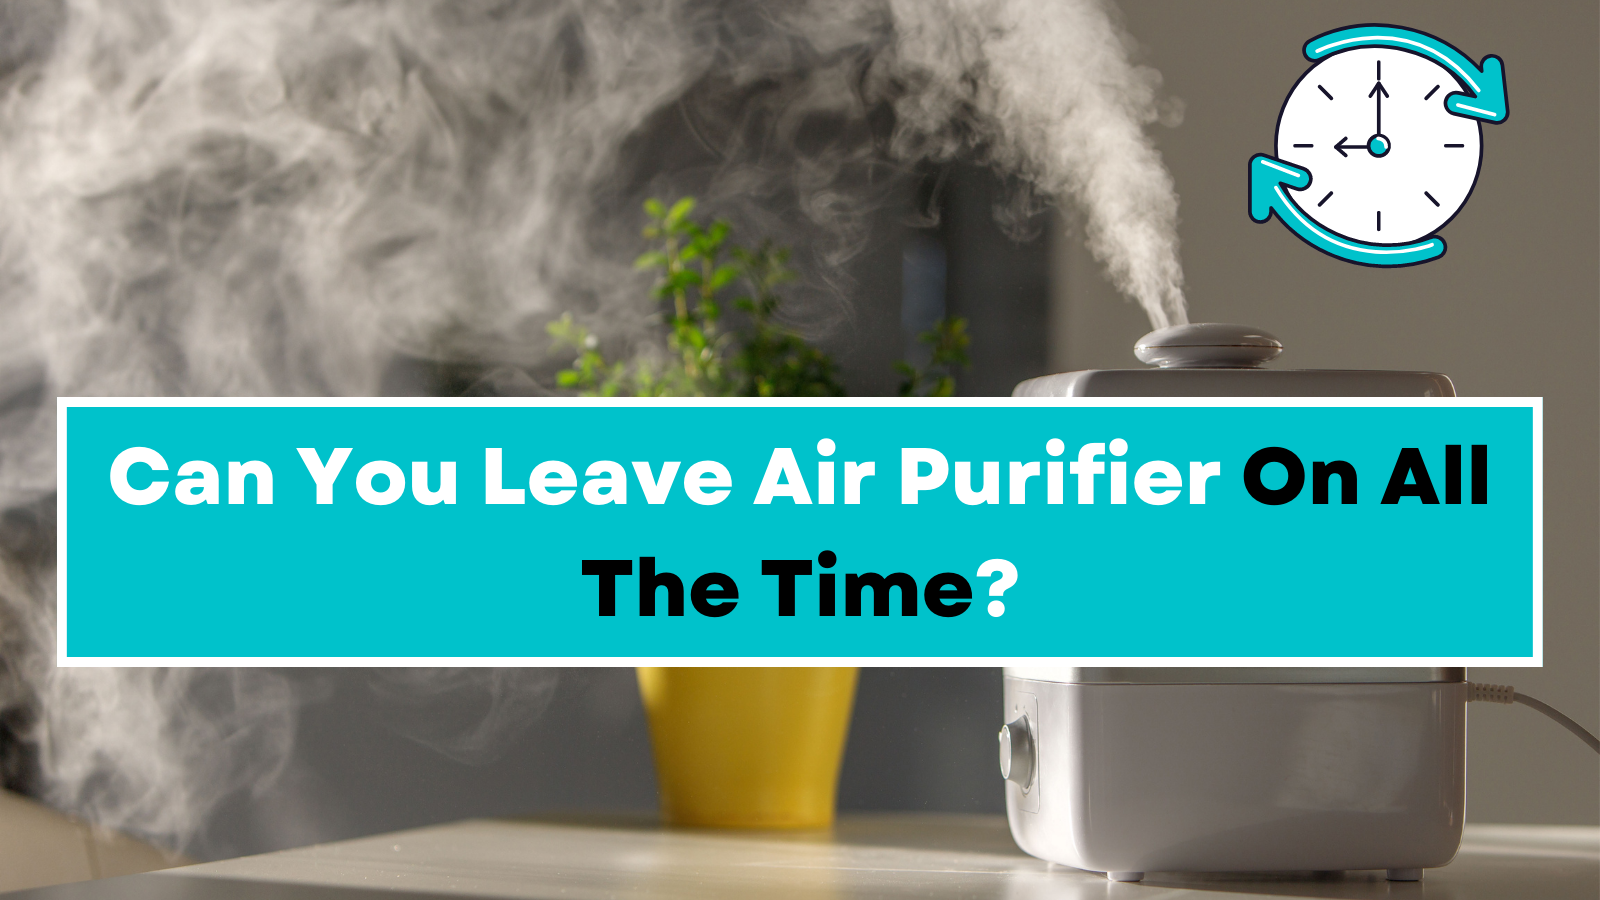 Can You Leave Air Purifier On All The Time?